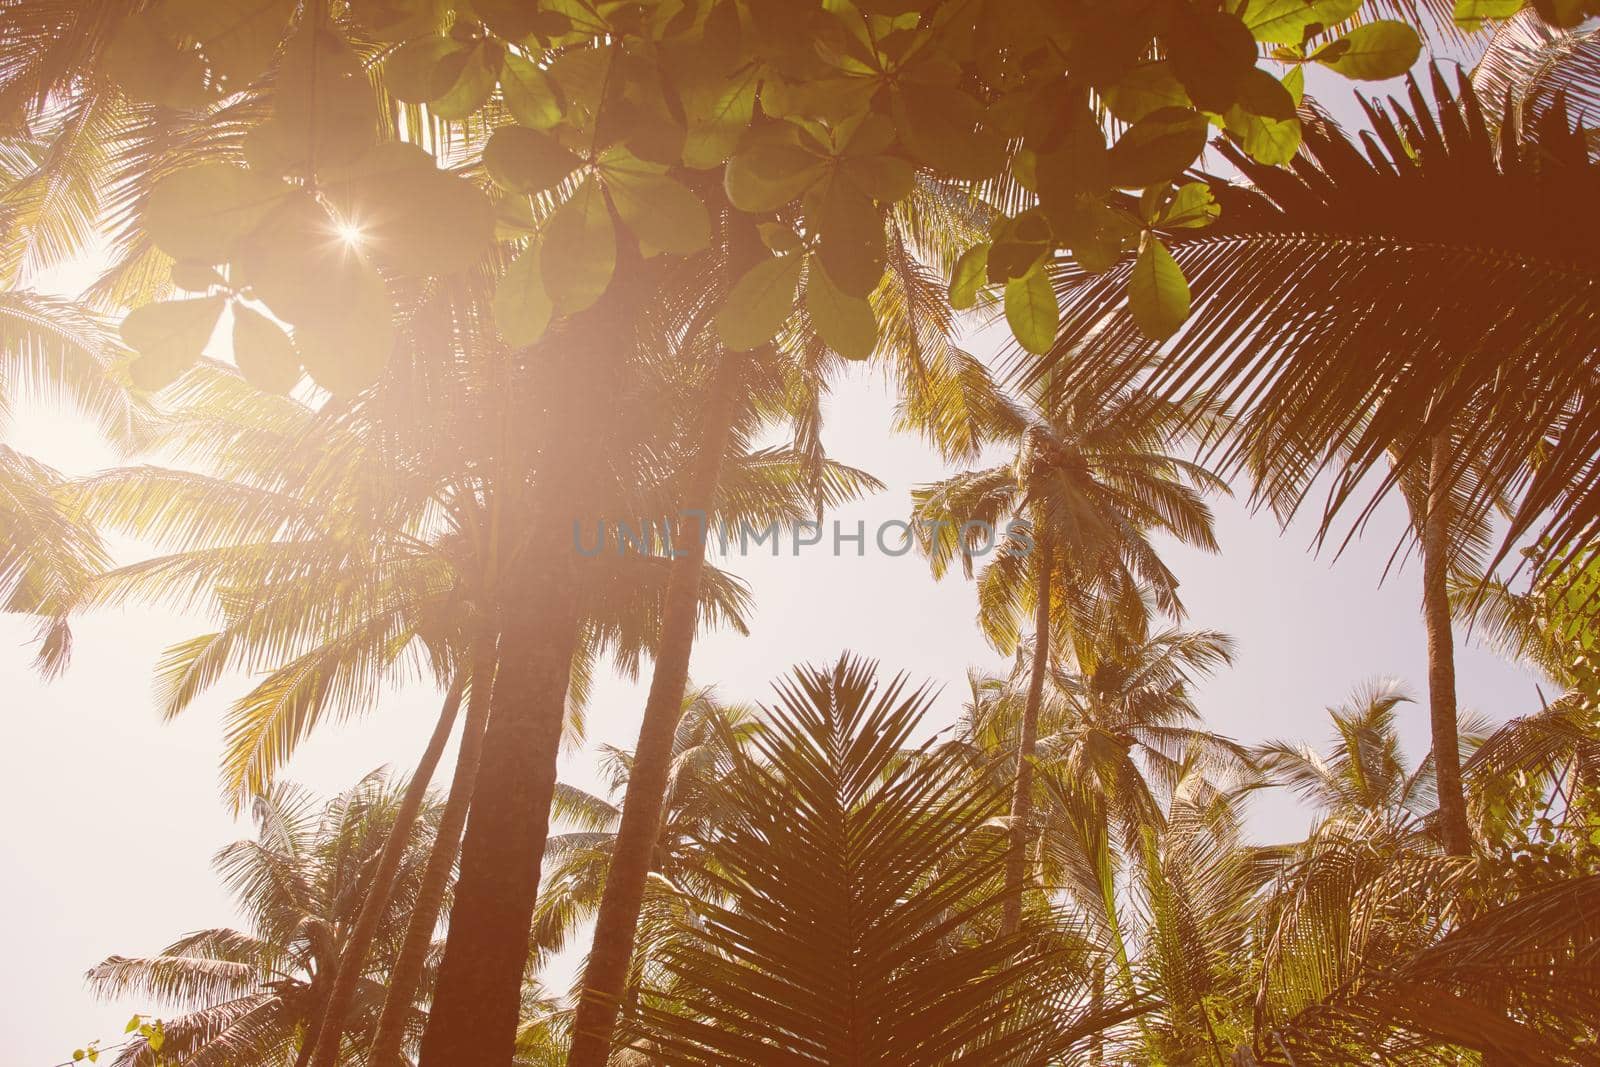 Retro style image of a sun flare pouring through the tree tops of tropical palms.